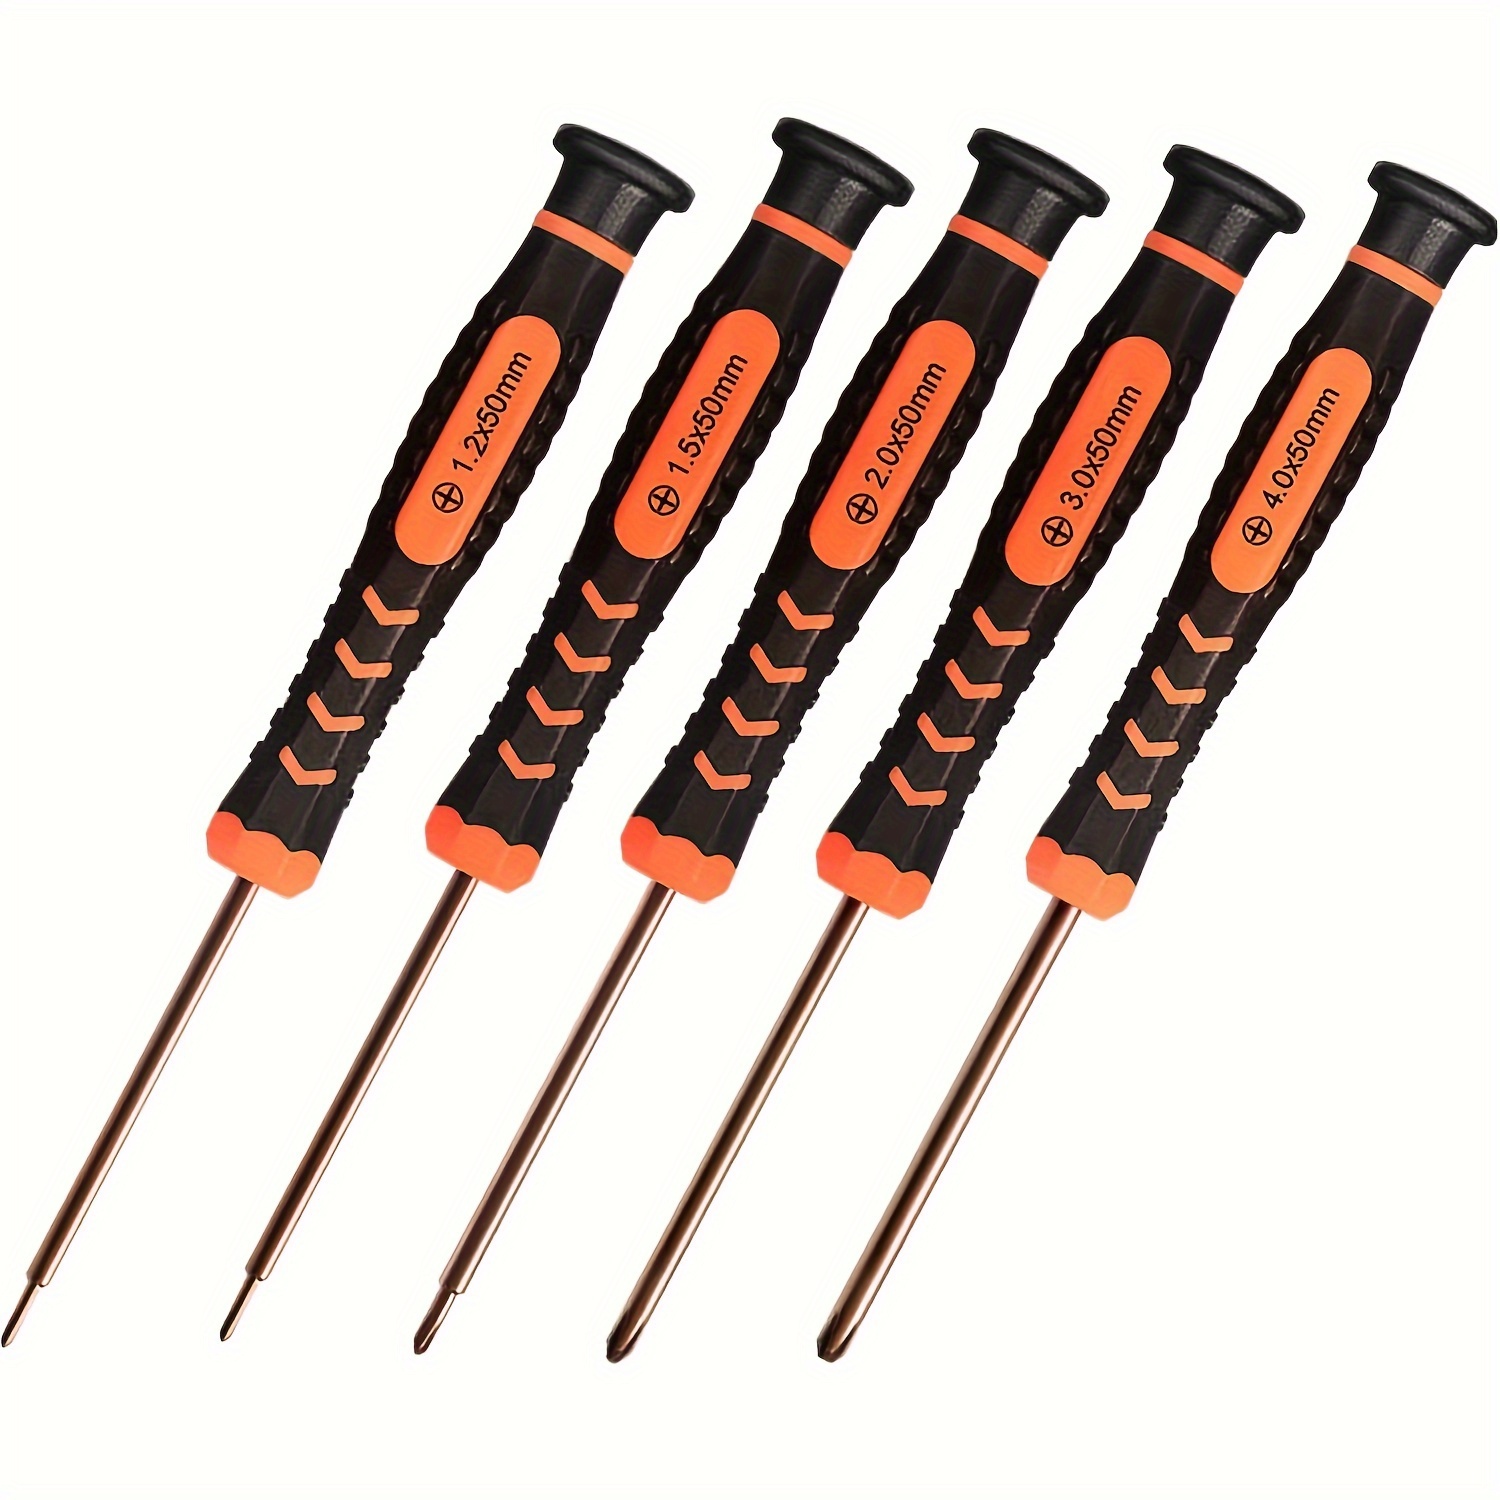 

5pcs Small Phillips Screwdriver Set, Repair Tools Kit For Steam Deck With 1.2mm, 1.5mm, 2.0mm, 3.0mm, 4.0mm The Most Commonly Used Phillips Screwdrivers